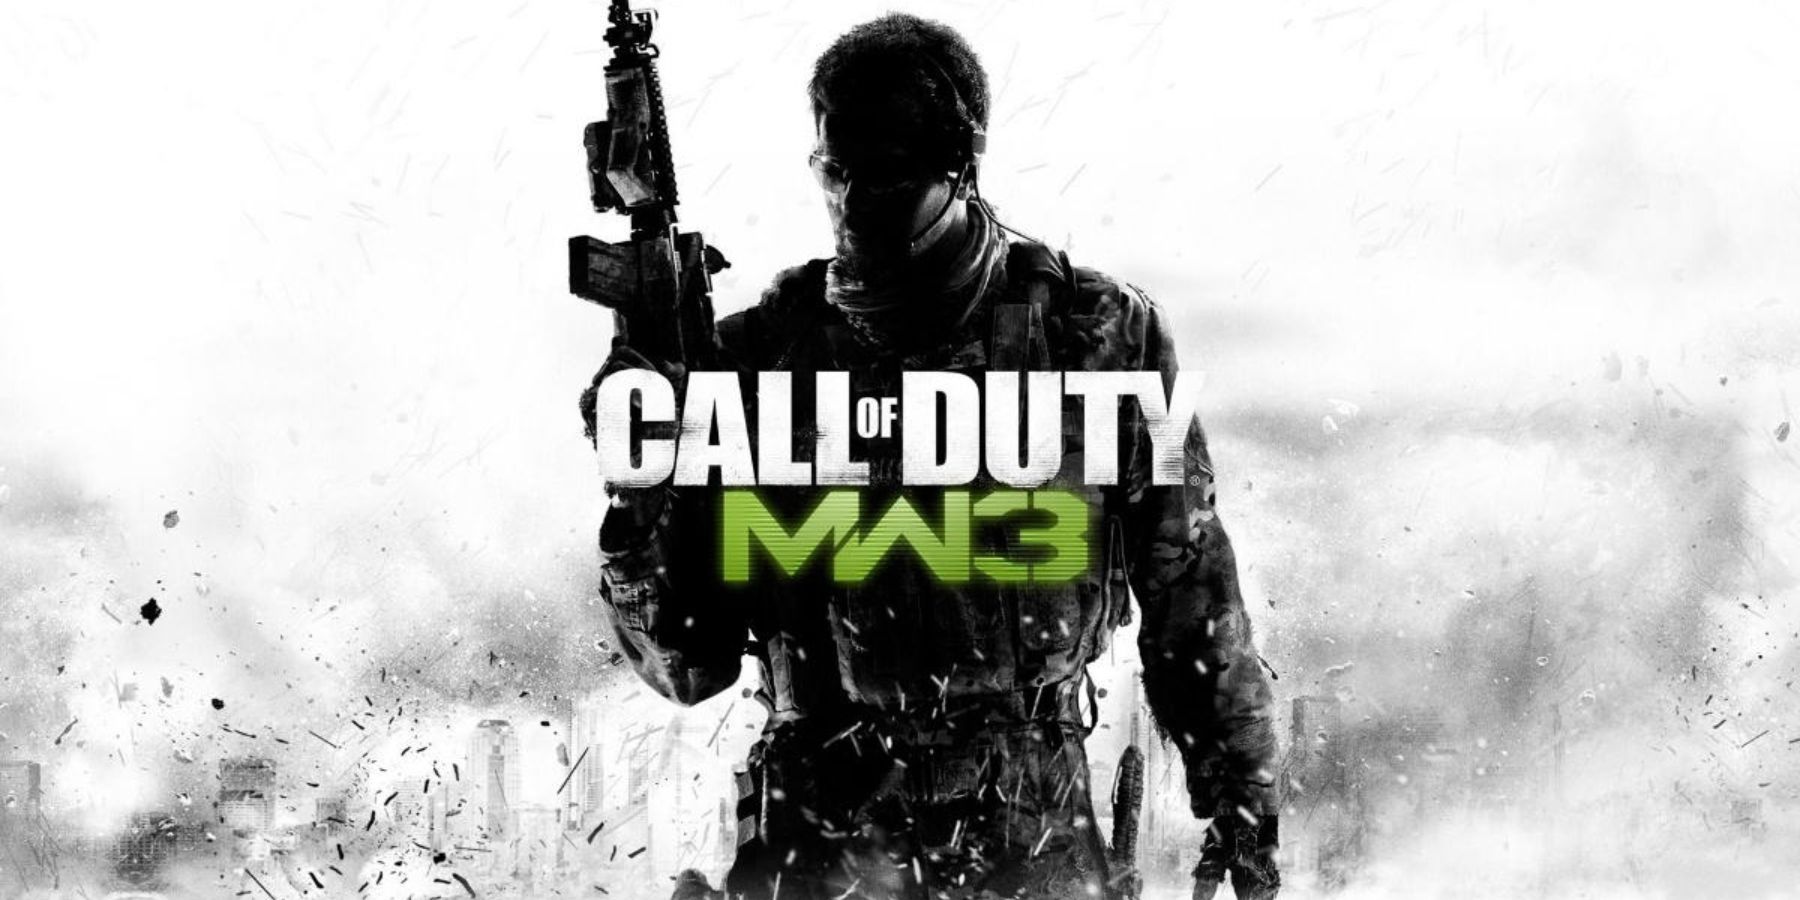 Call of Duty Modern Warfare 3 Release Month Leaked by Judge